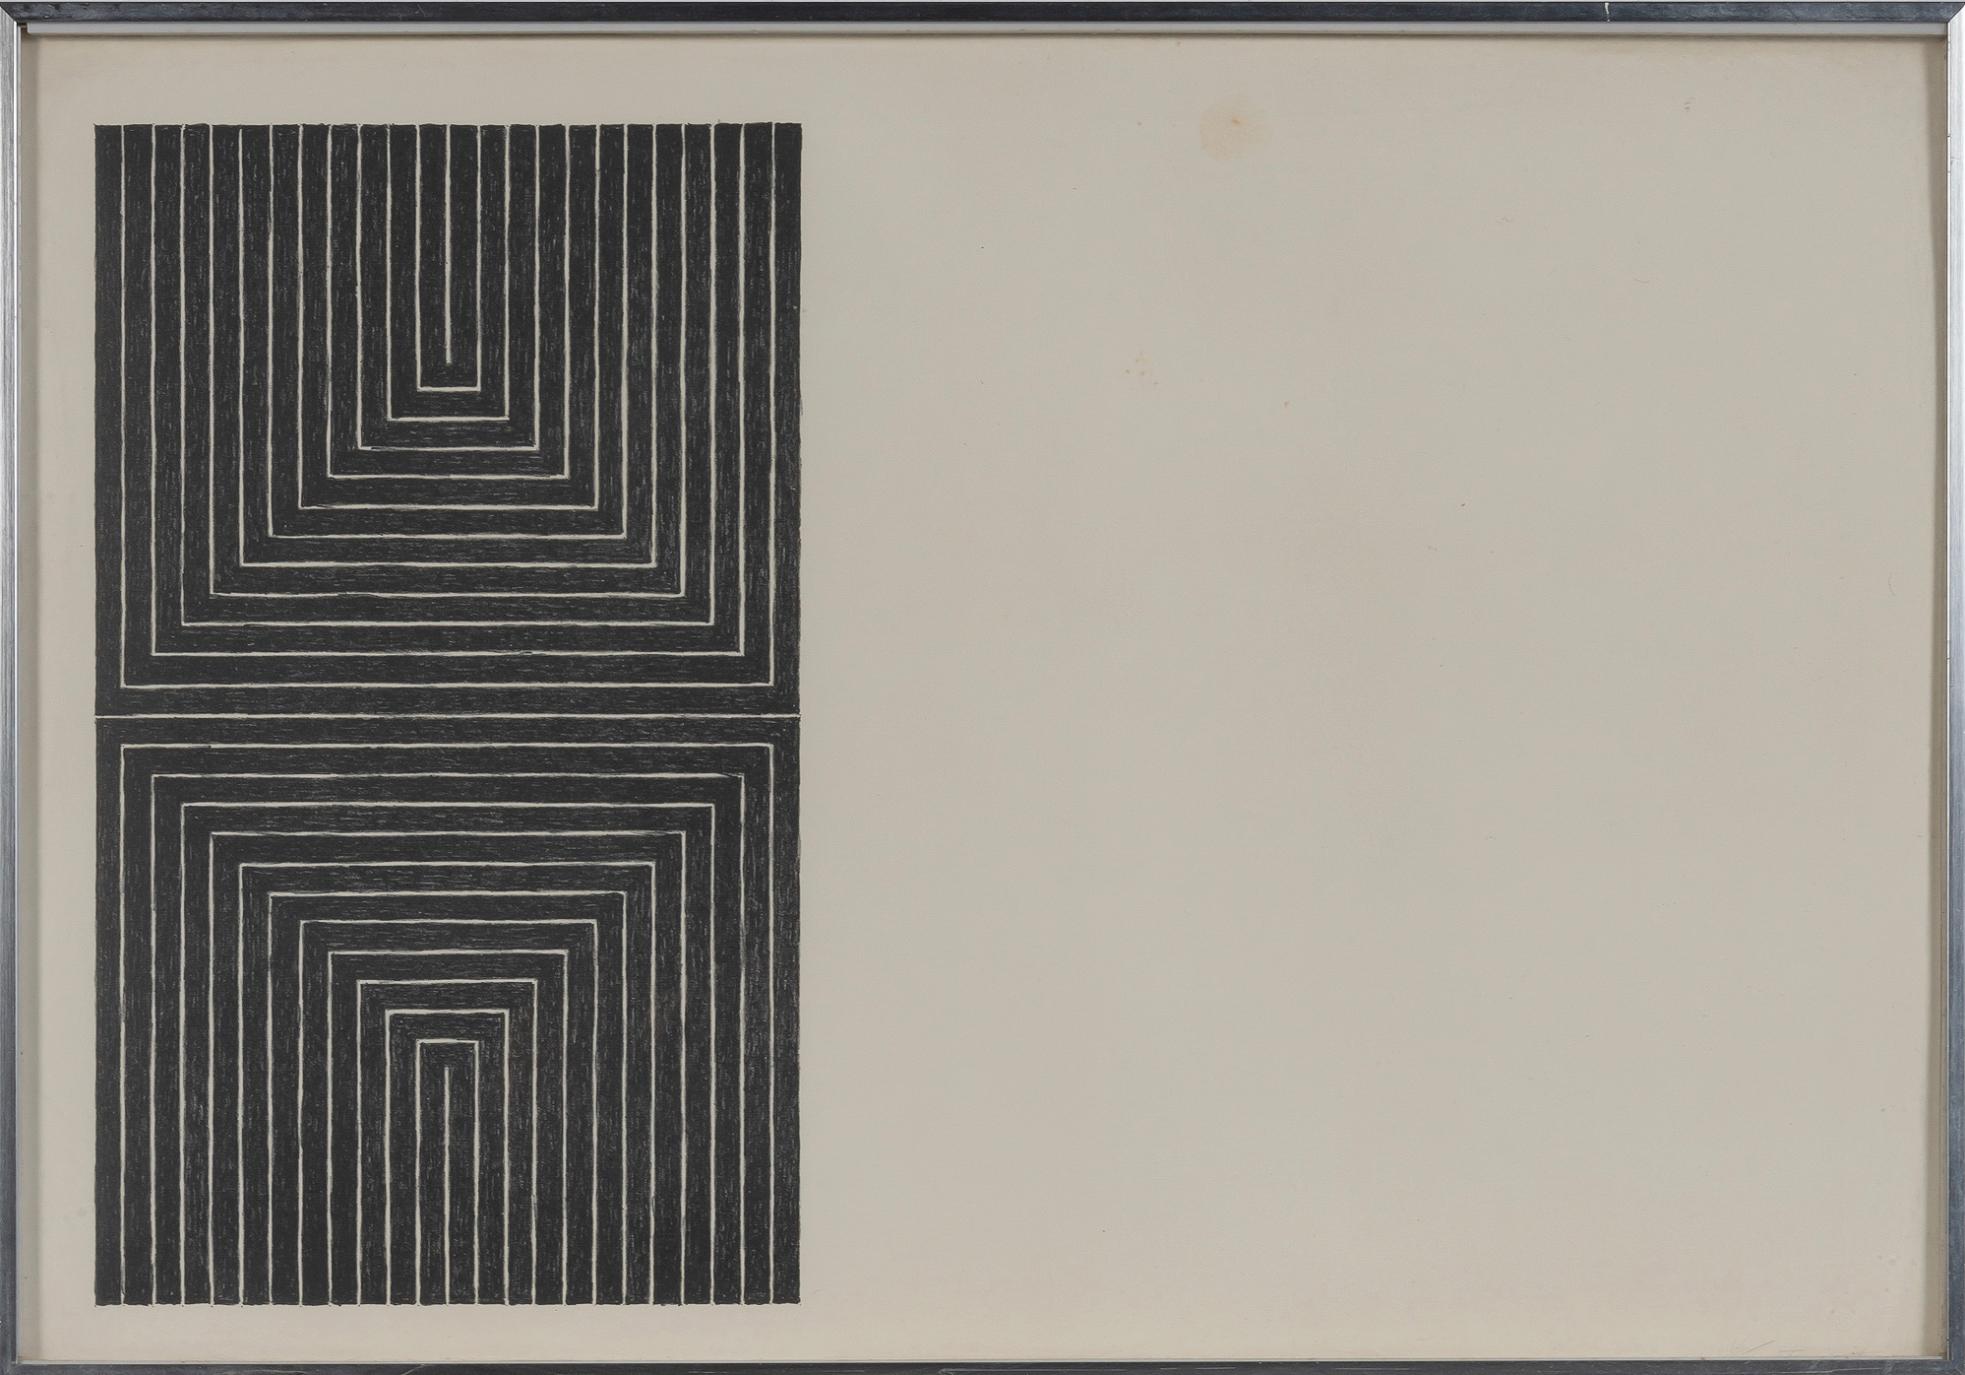 FRANK STELLA (1936-Present)

Lithograph, 1967, on Barcham Green paper, signed, dated and numbered 66/100 in pencil, from Black Series I, published by Gemini G.E.L., Los Angeles and with their blindstamps, with full margins, framed.

Literature: Axom